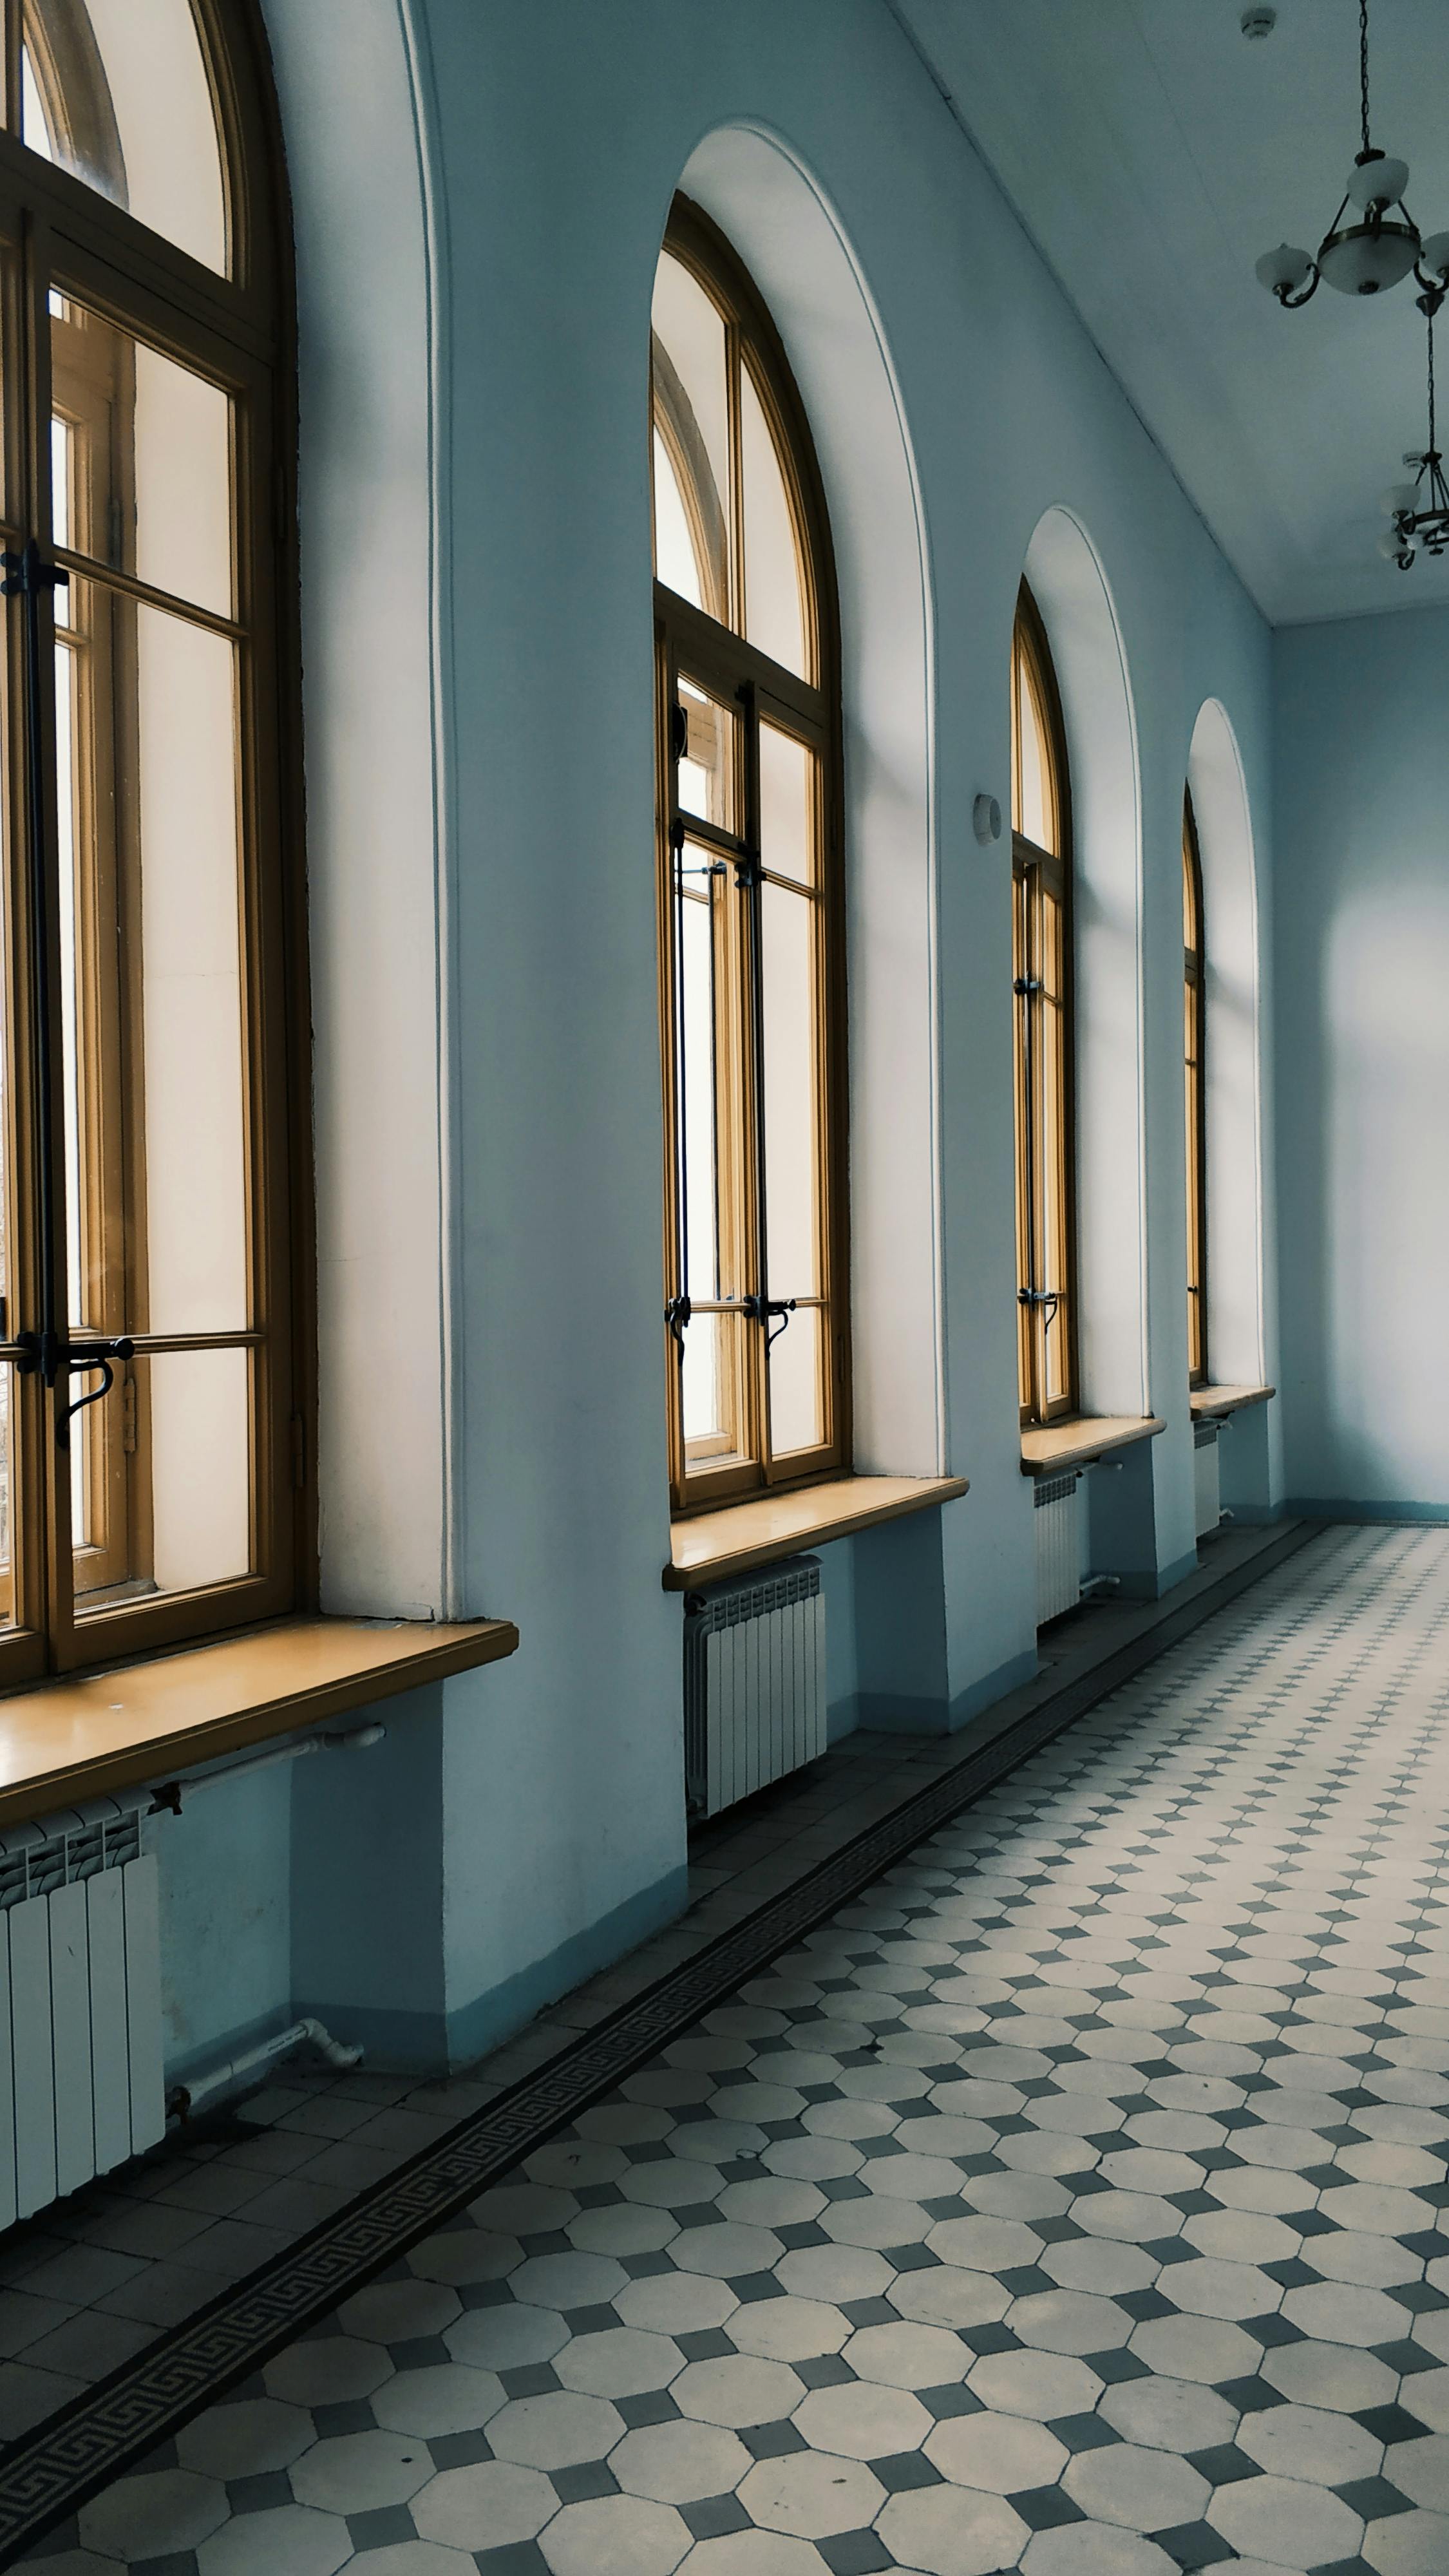 interior of empty light hallway with arched windows